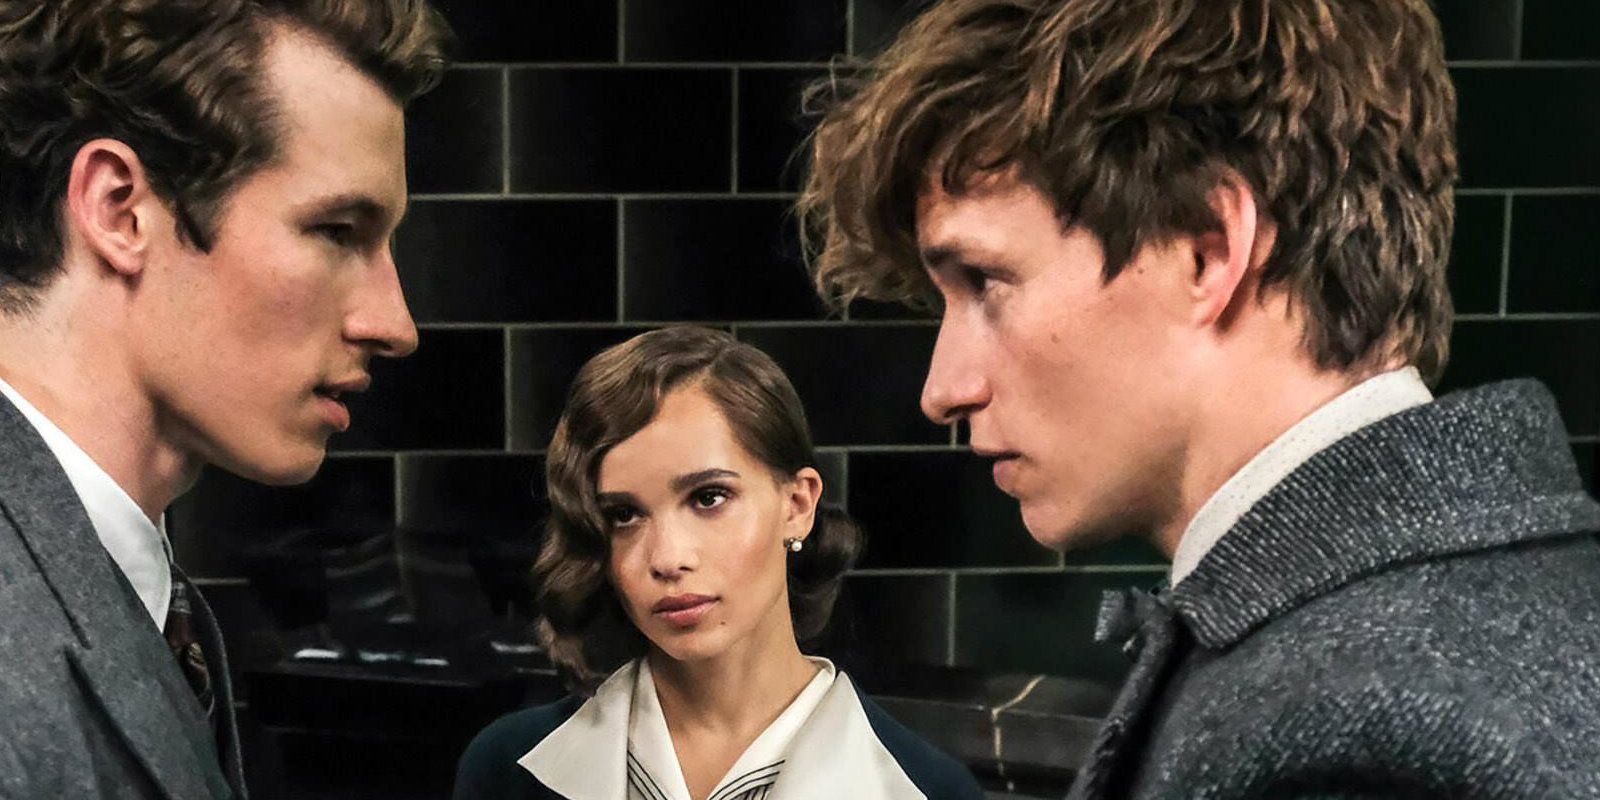 The Biggest Letdowns Of Fantastic Beasts The Crimes of Grindelwald